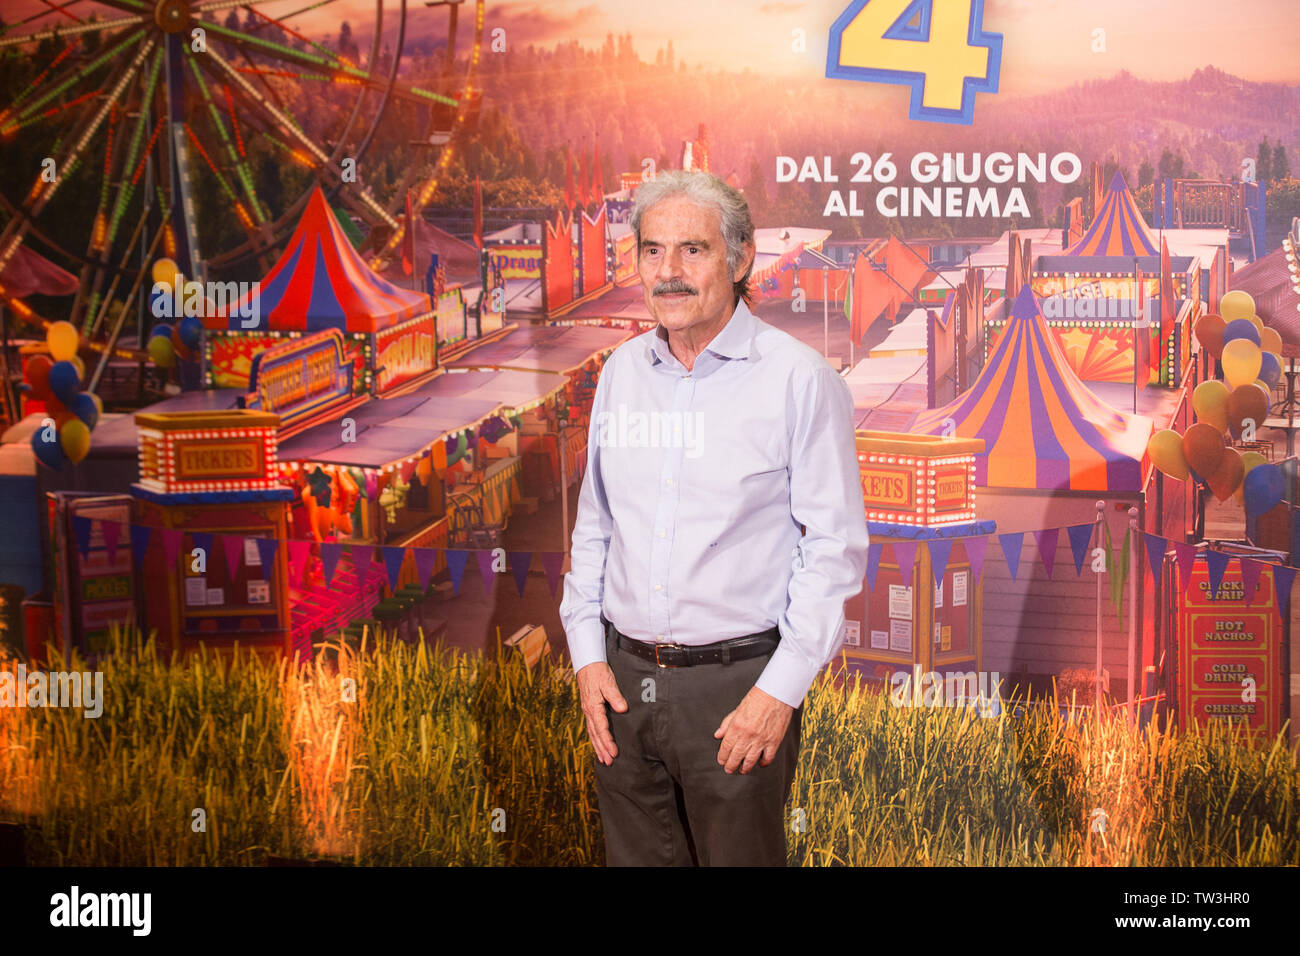 Roma, Italy. 18th June, 2019. Italian actor Massimo Dapporto Photocall in Rome of the film 'Toy Story 4' with the Italian voice actors of the film Credit: Matteo Nardone/Pacific Press/Alamy Live News Stock Photo